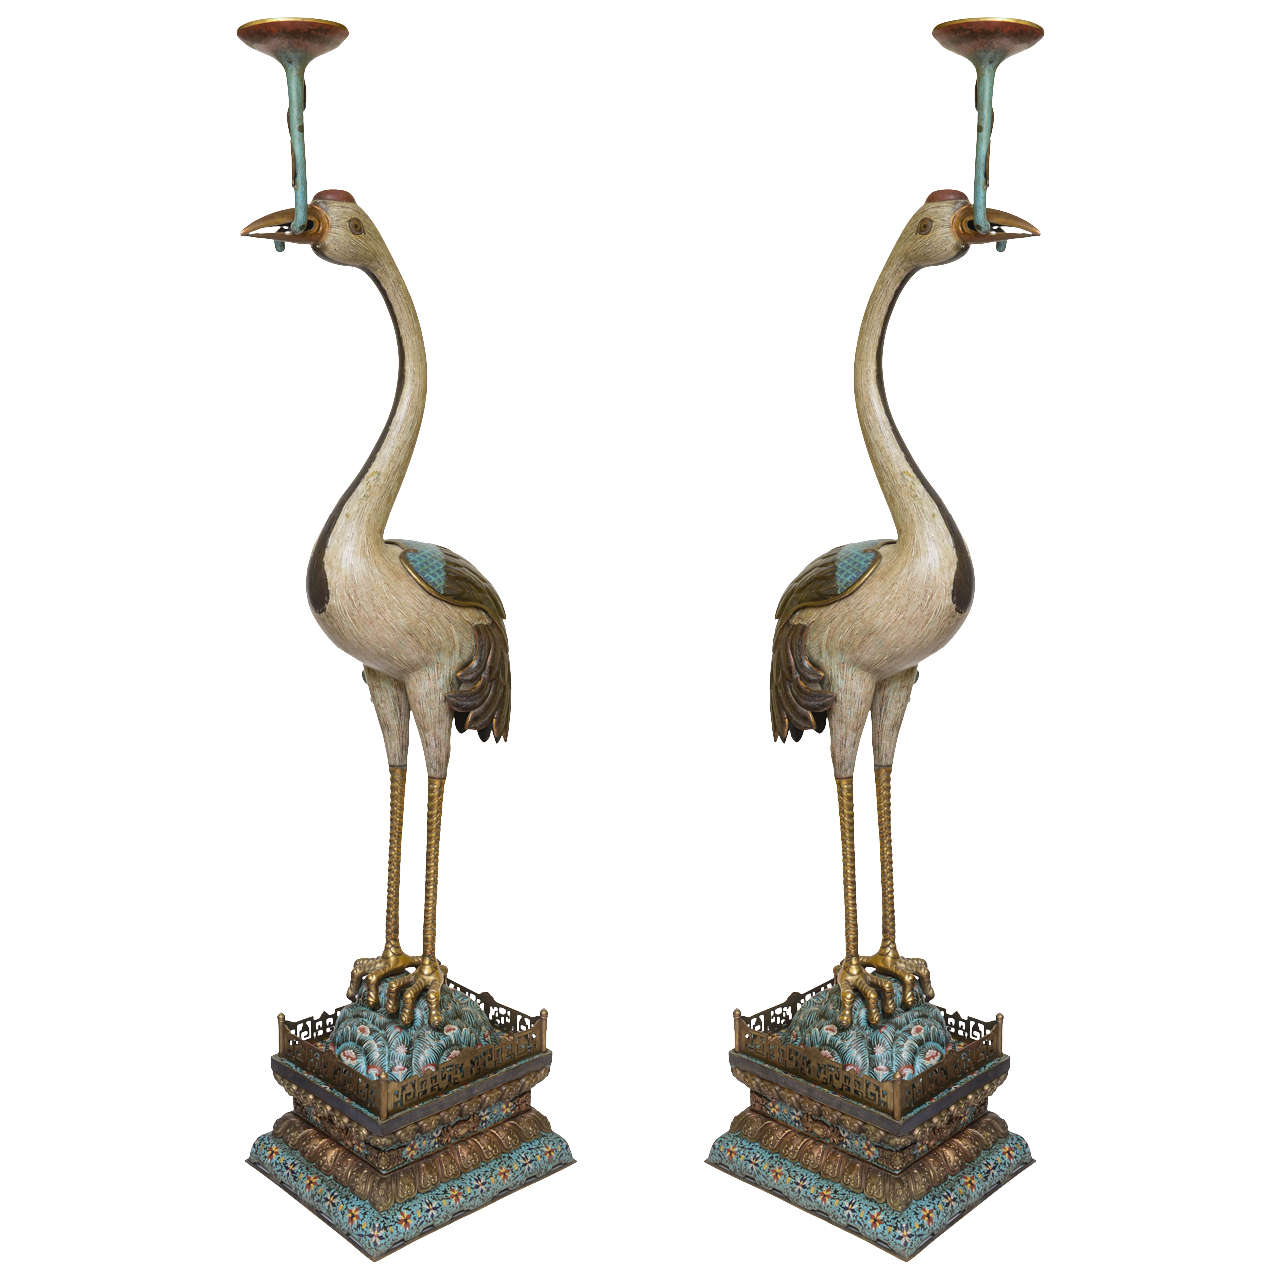 Extraordinary Pair of "Monumental" Cloisonné Birds with Prickets